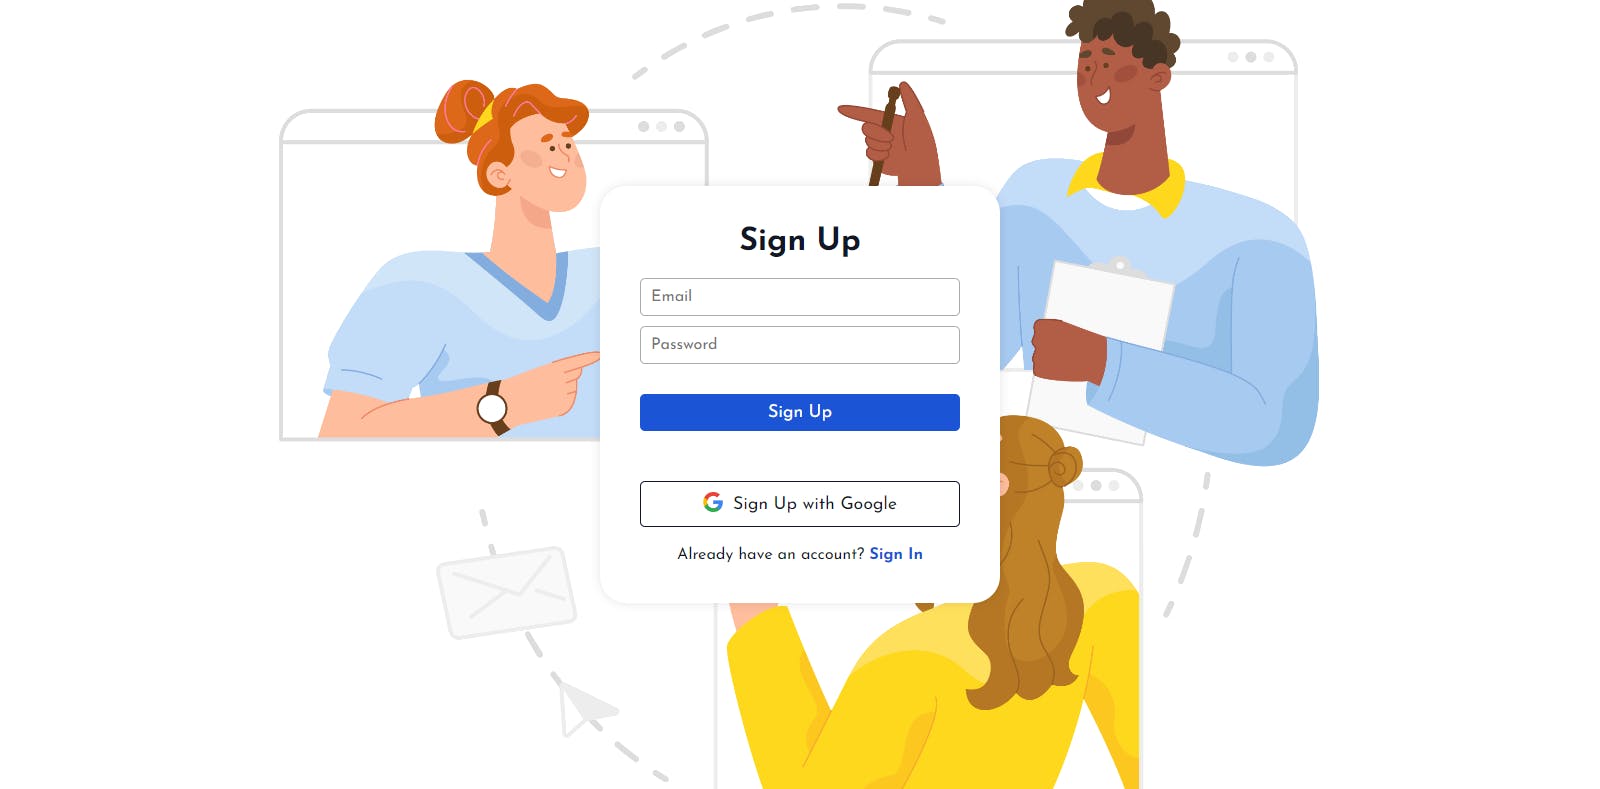 Sign up page interface